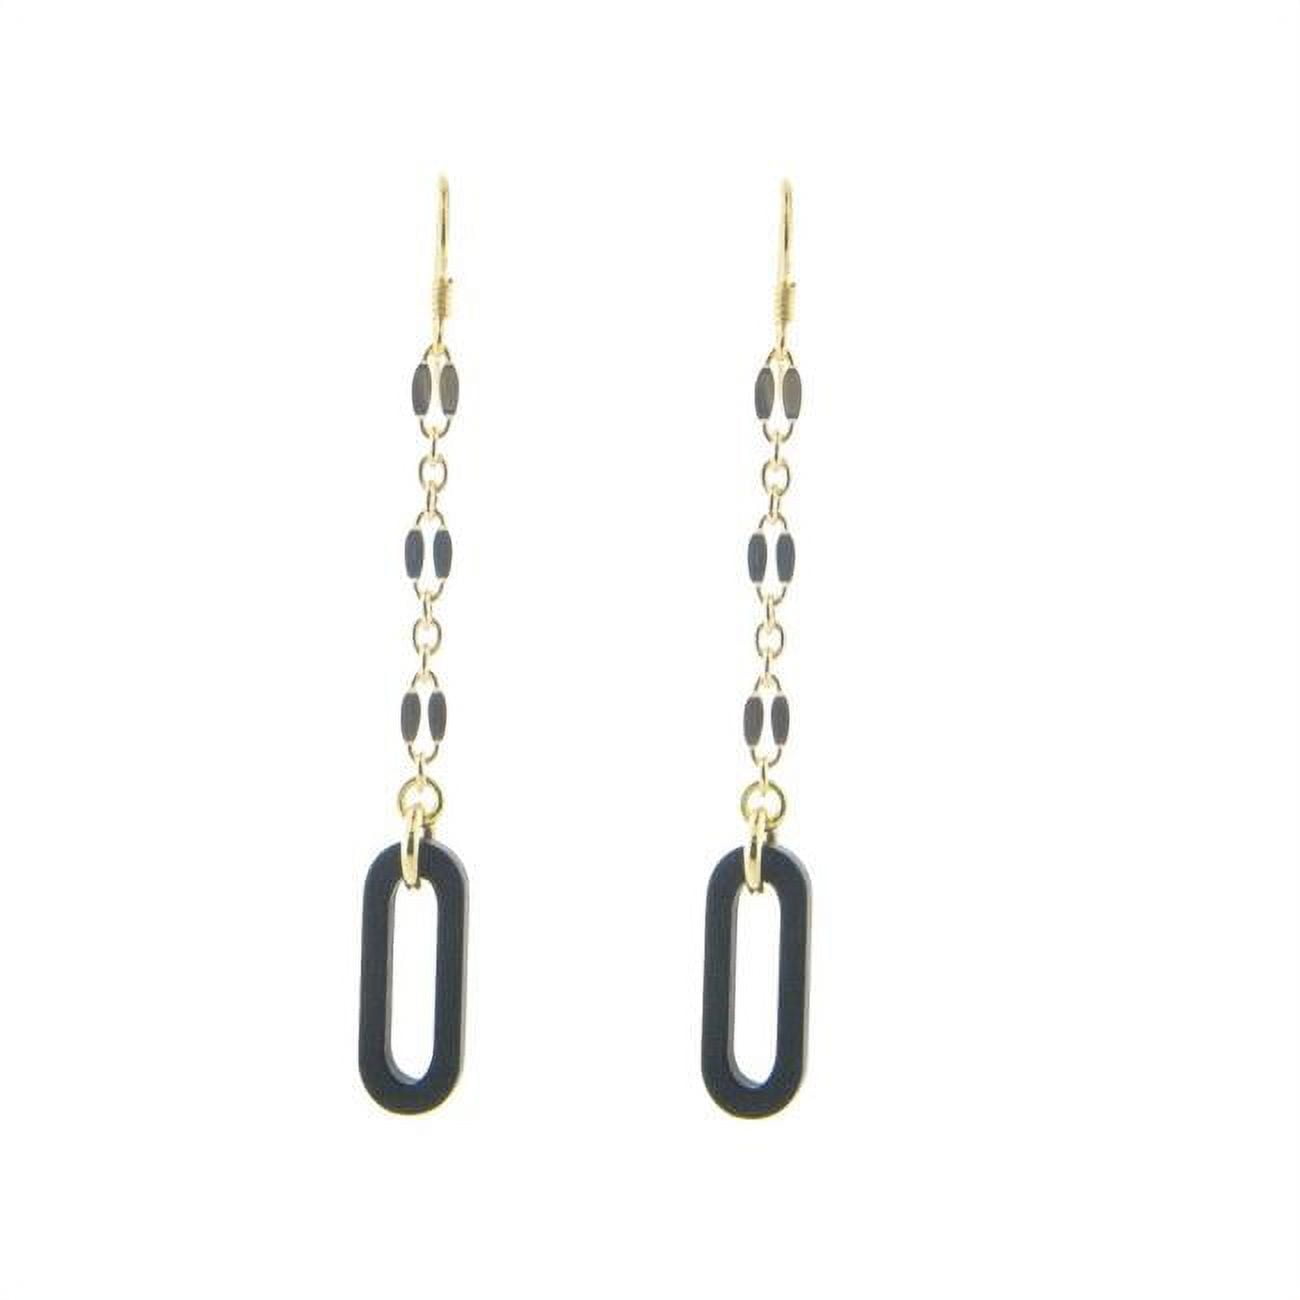 Picture of Fronay 405187 Black & Gold Hook Earrings in Sterling Silver